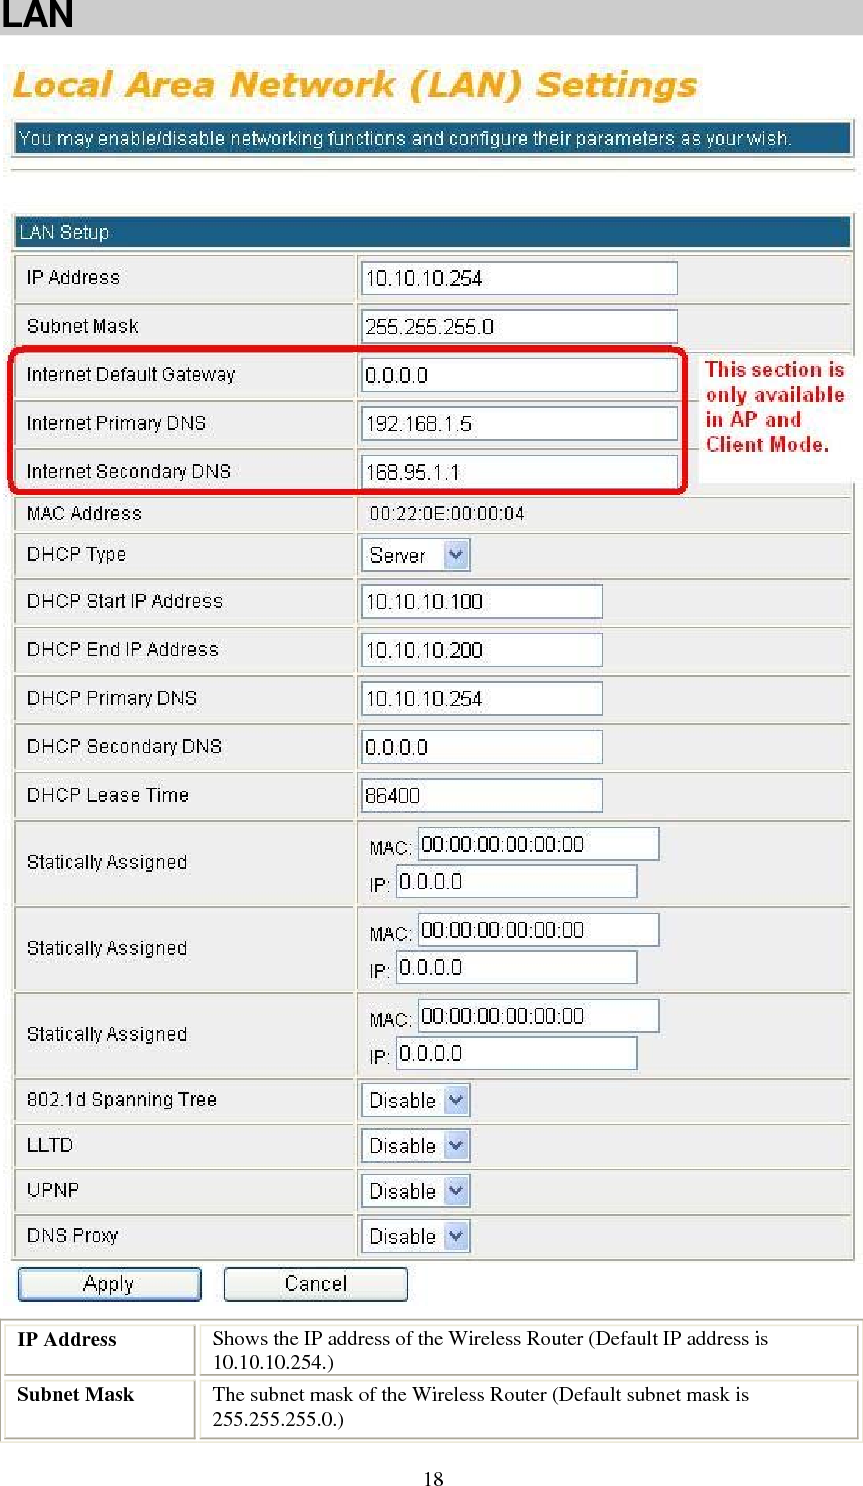   18LAN   IP Address  Shows the IP address of the Wireless Router (Default IP address is 10.10.10.254.) Subnet Mask  The subnet mask of the Wireless Router (Default subnet mask is 255.255.255.0.) 